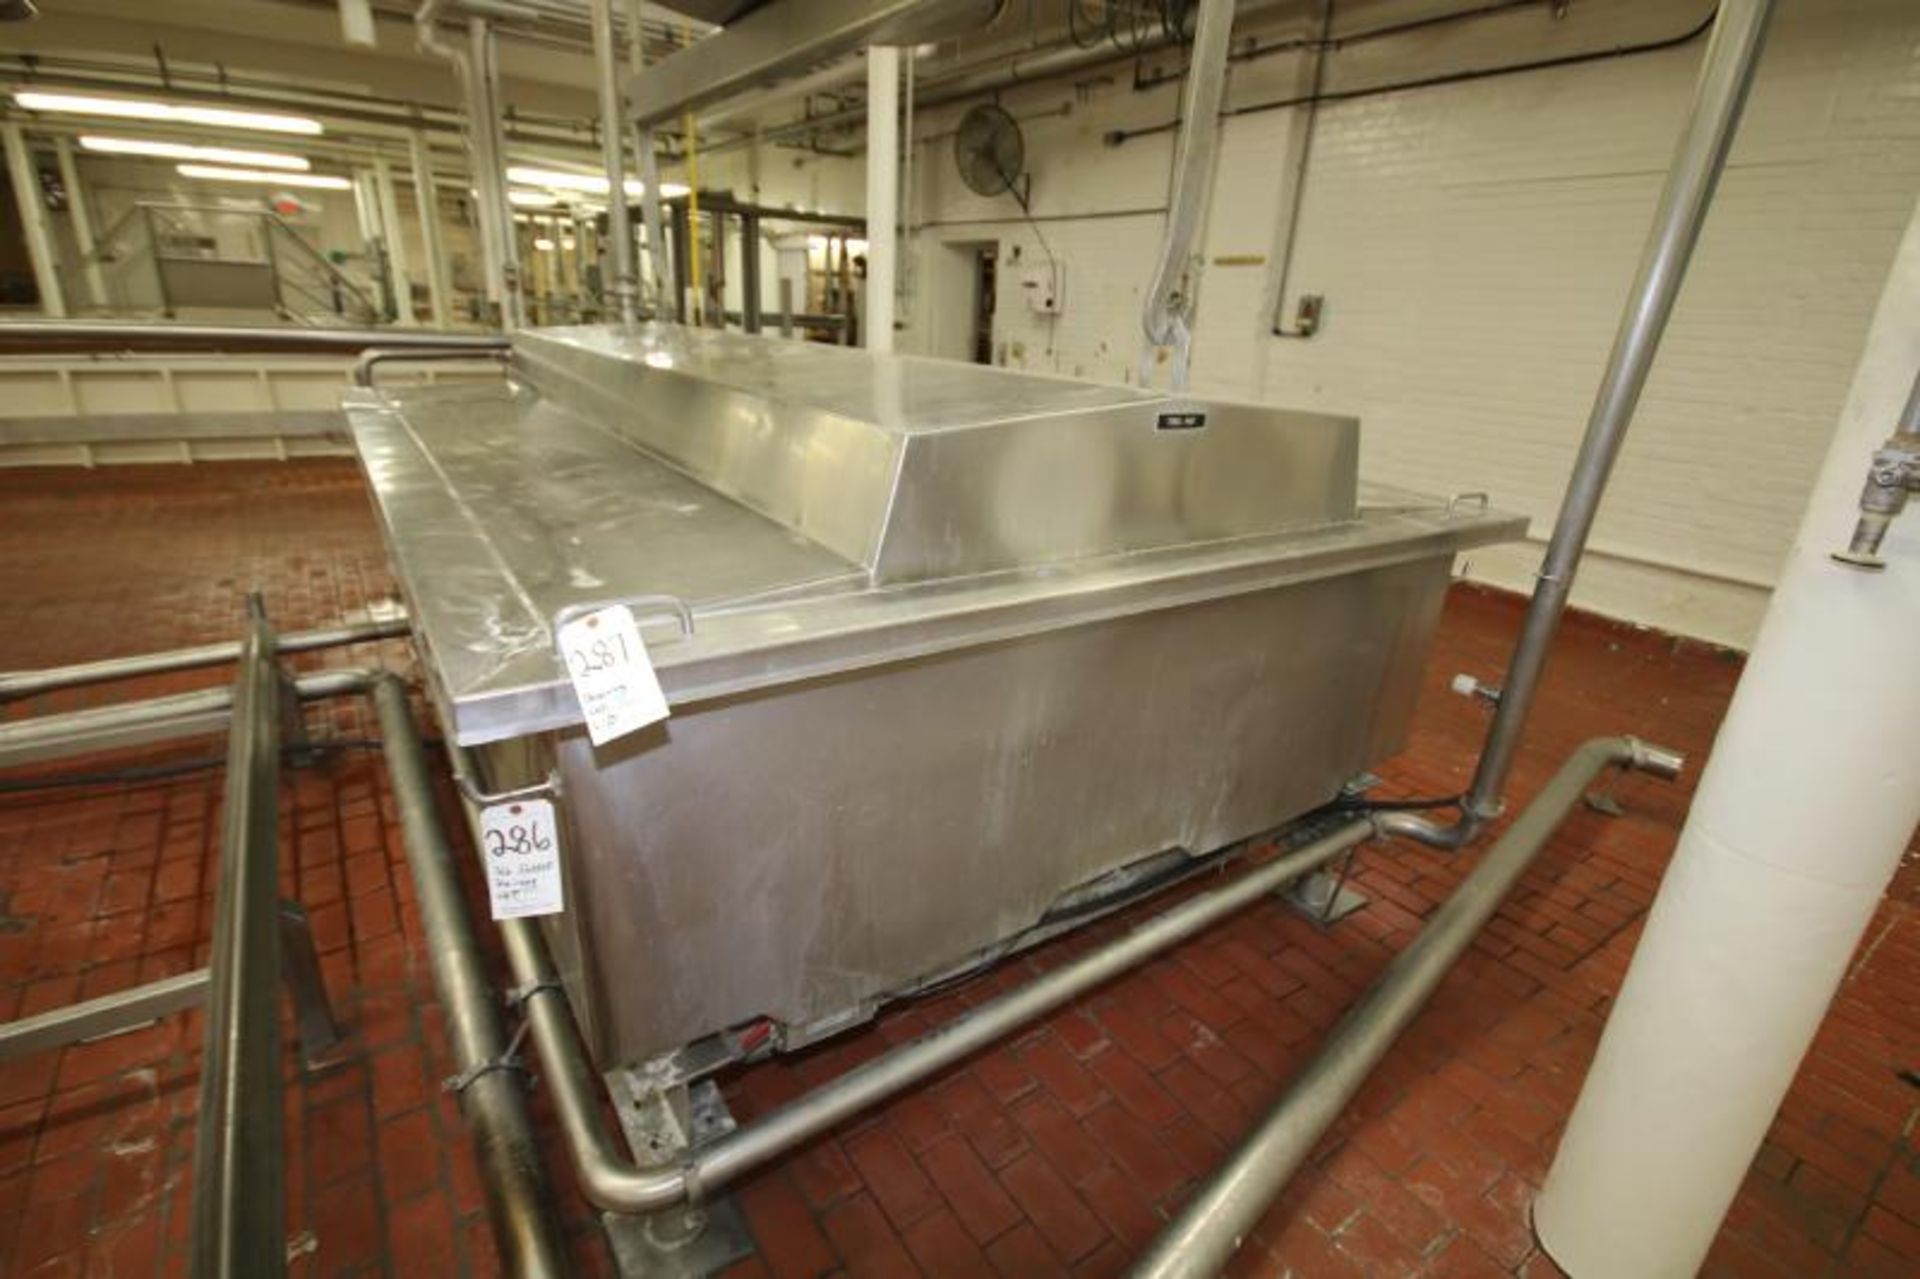 Tetra-Tebel MKT Aprox. 80" W x 114" L x 24" Deep S/S Cheese Draining Vat/Table, Mounted on Mettler